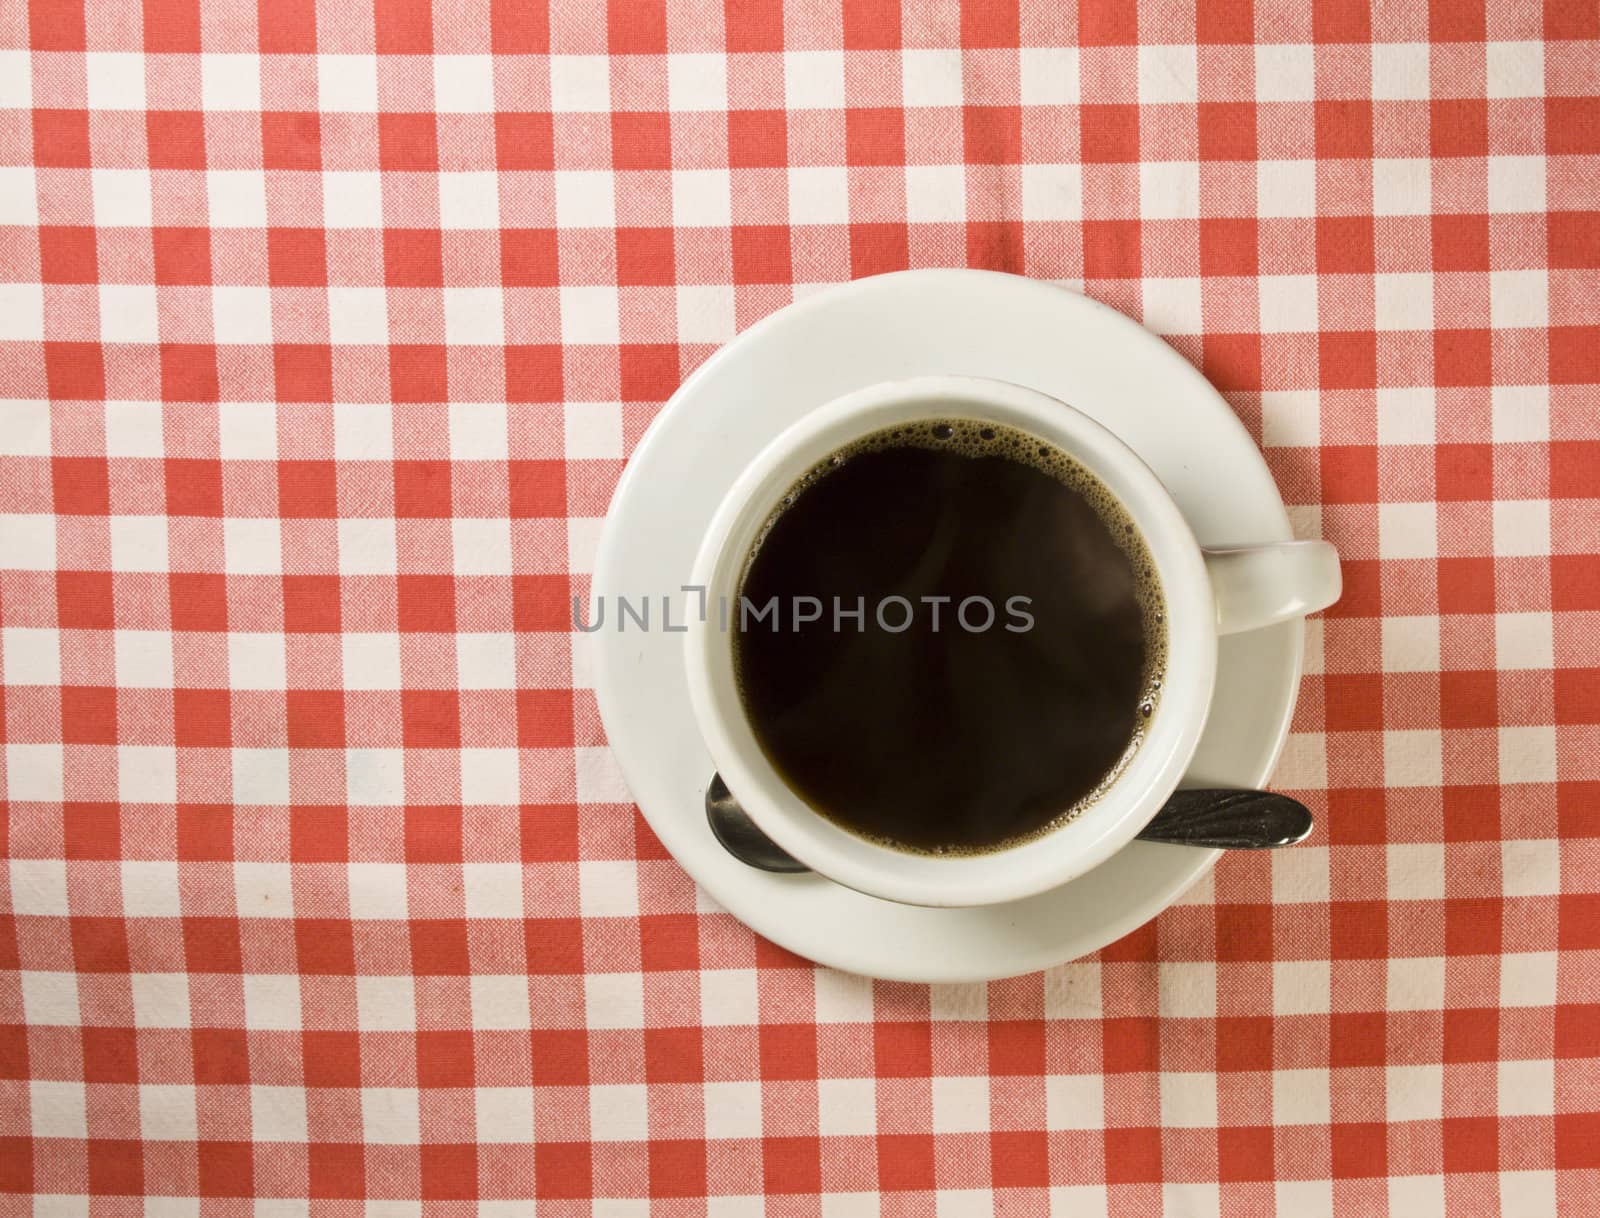 Fresh coffee on a red-white fabric cloth